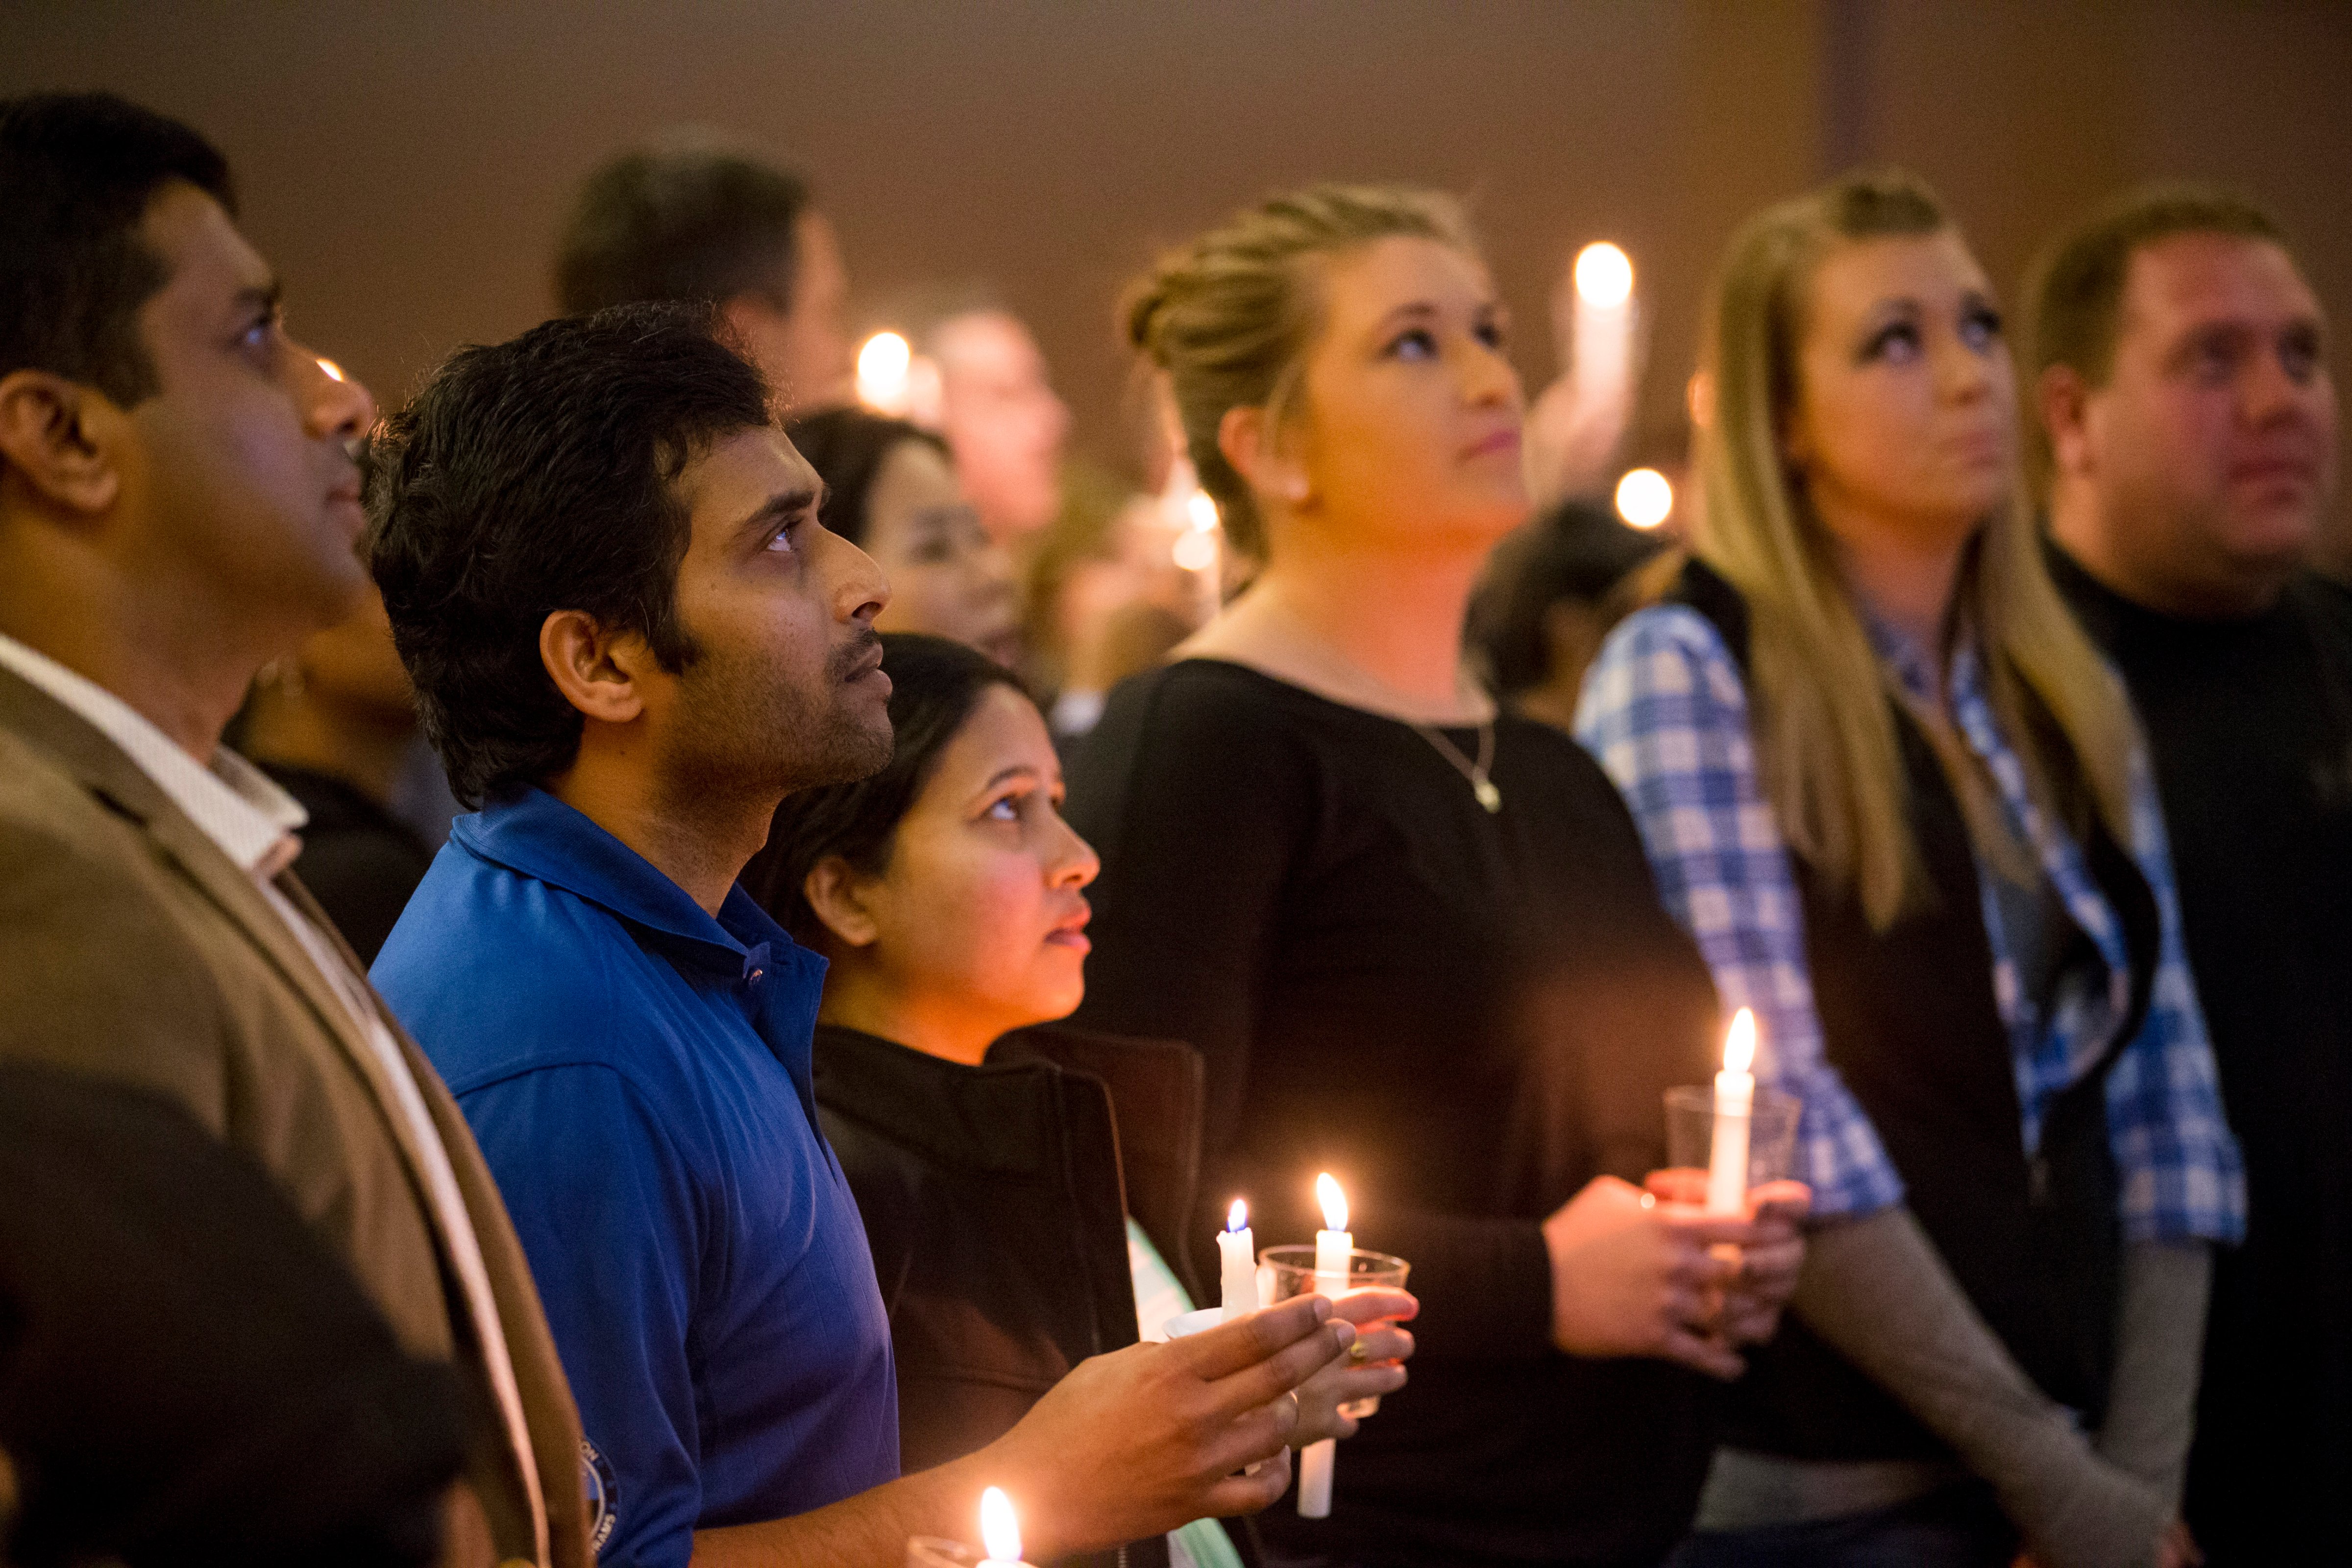 Alok Madasani, wife Reepthi Gangula; and Laura and Maggie Grillot, sisters to shooting victim Ian Grillot listen to the final songs at the end of the Prayer Vigil on February 26, 2017 at the Ball Conference Center in Olathe, Kansas. (Kyle Rivas—Getty Images)